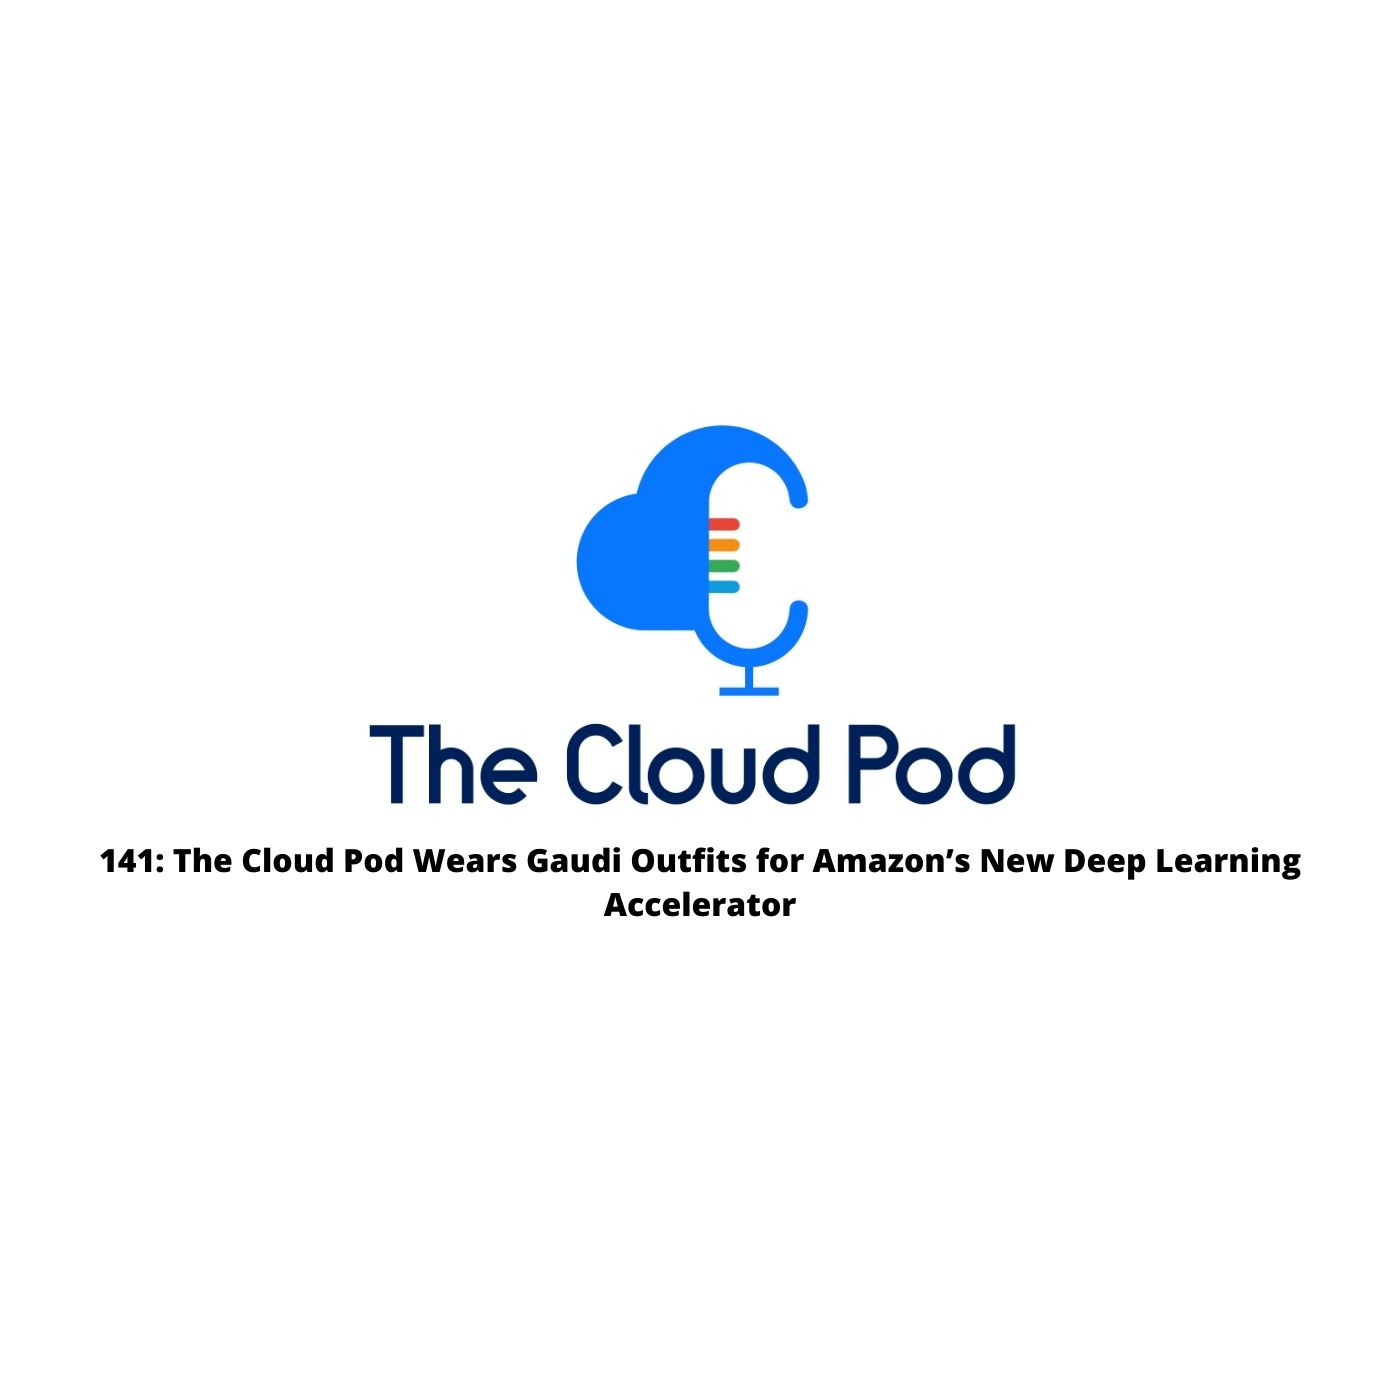 141: The Cloud Pod Wears Gaudi Outfits for Amazon’s New Deep Learning Accelerator